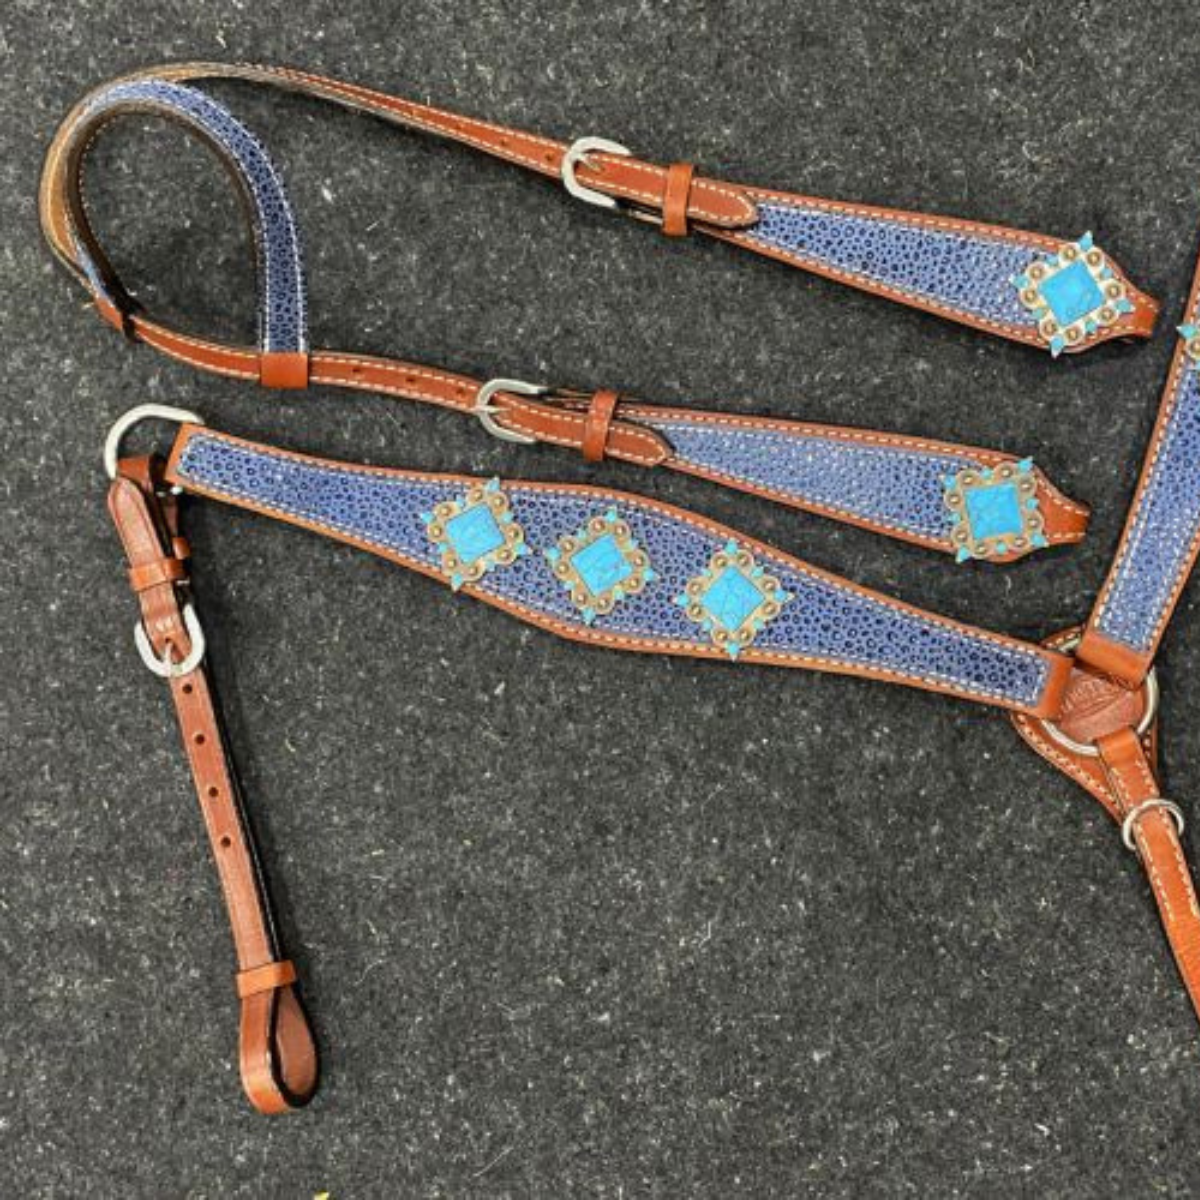 Showman ® Blue Cheetah Print One Ear Headstall and Breast Collar set. - Double T Saddles